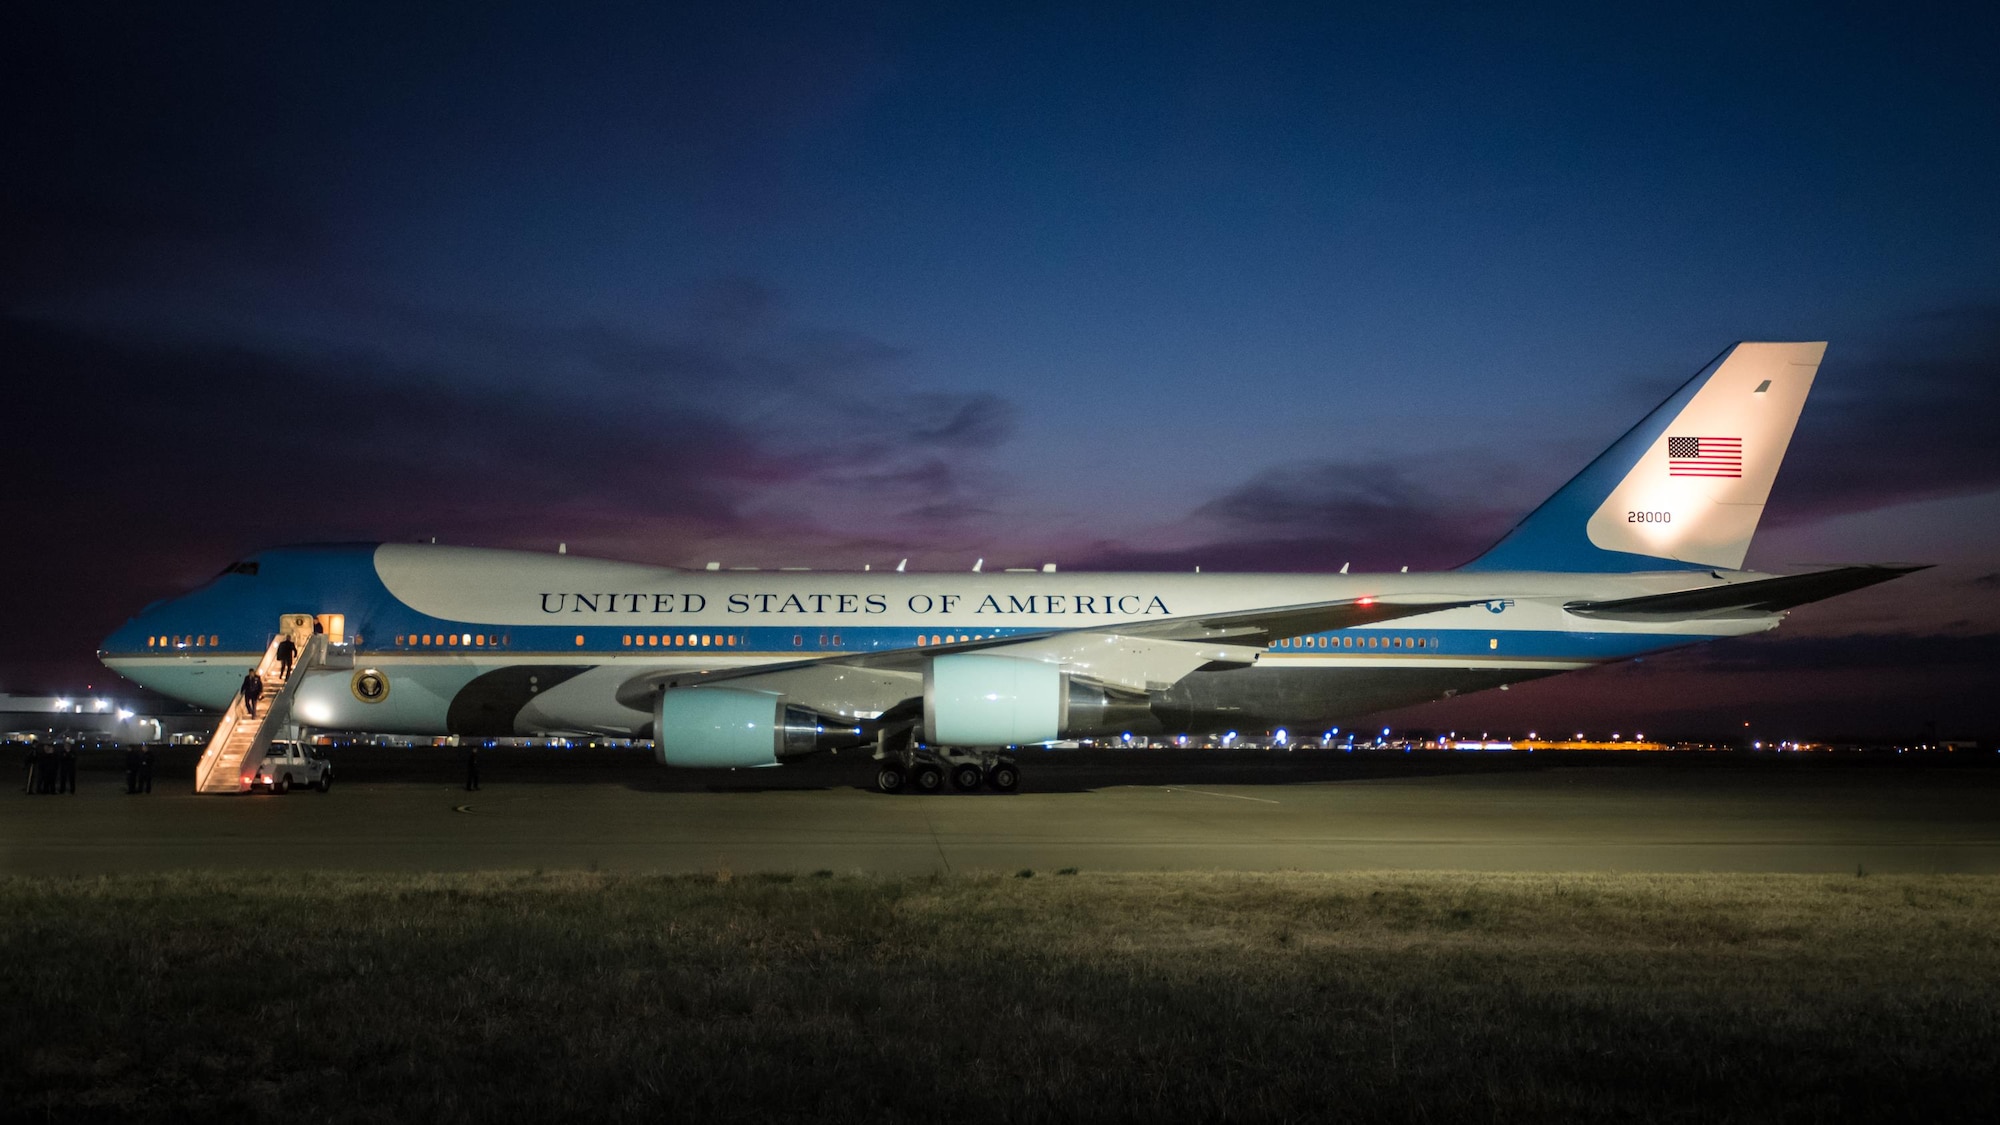 Air Force One sits on the flight line at the Kentucky Air National Guard Base in Louisville, Ky., March 20, 2017. President Donald Trump was in Louisville to attend a campaign rally at the Kentucky Exposition Center. (U.S. Air National Guard photo by Lt. Col. Dale Greer)